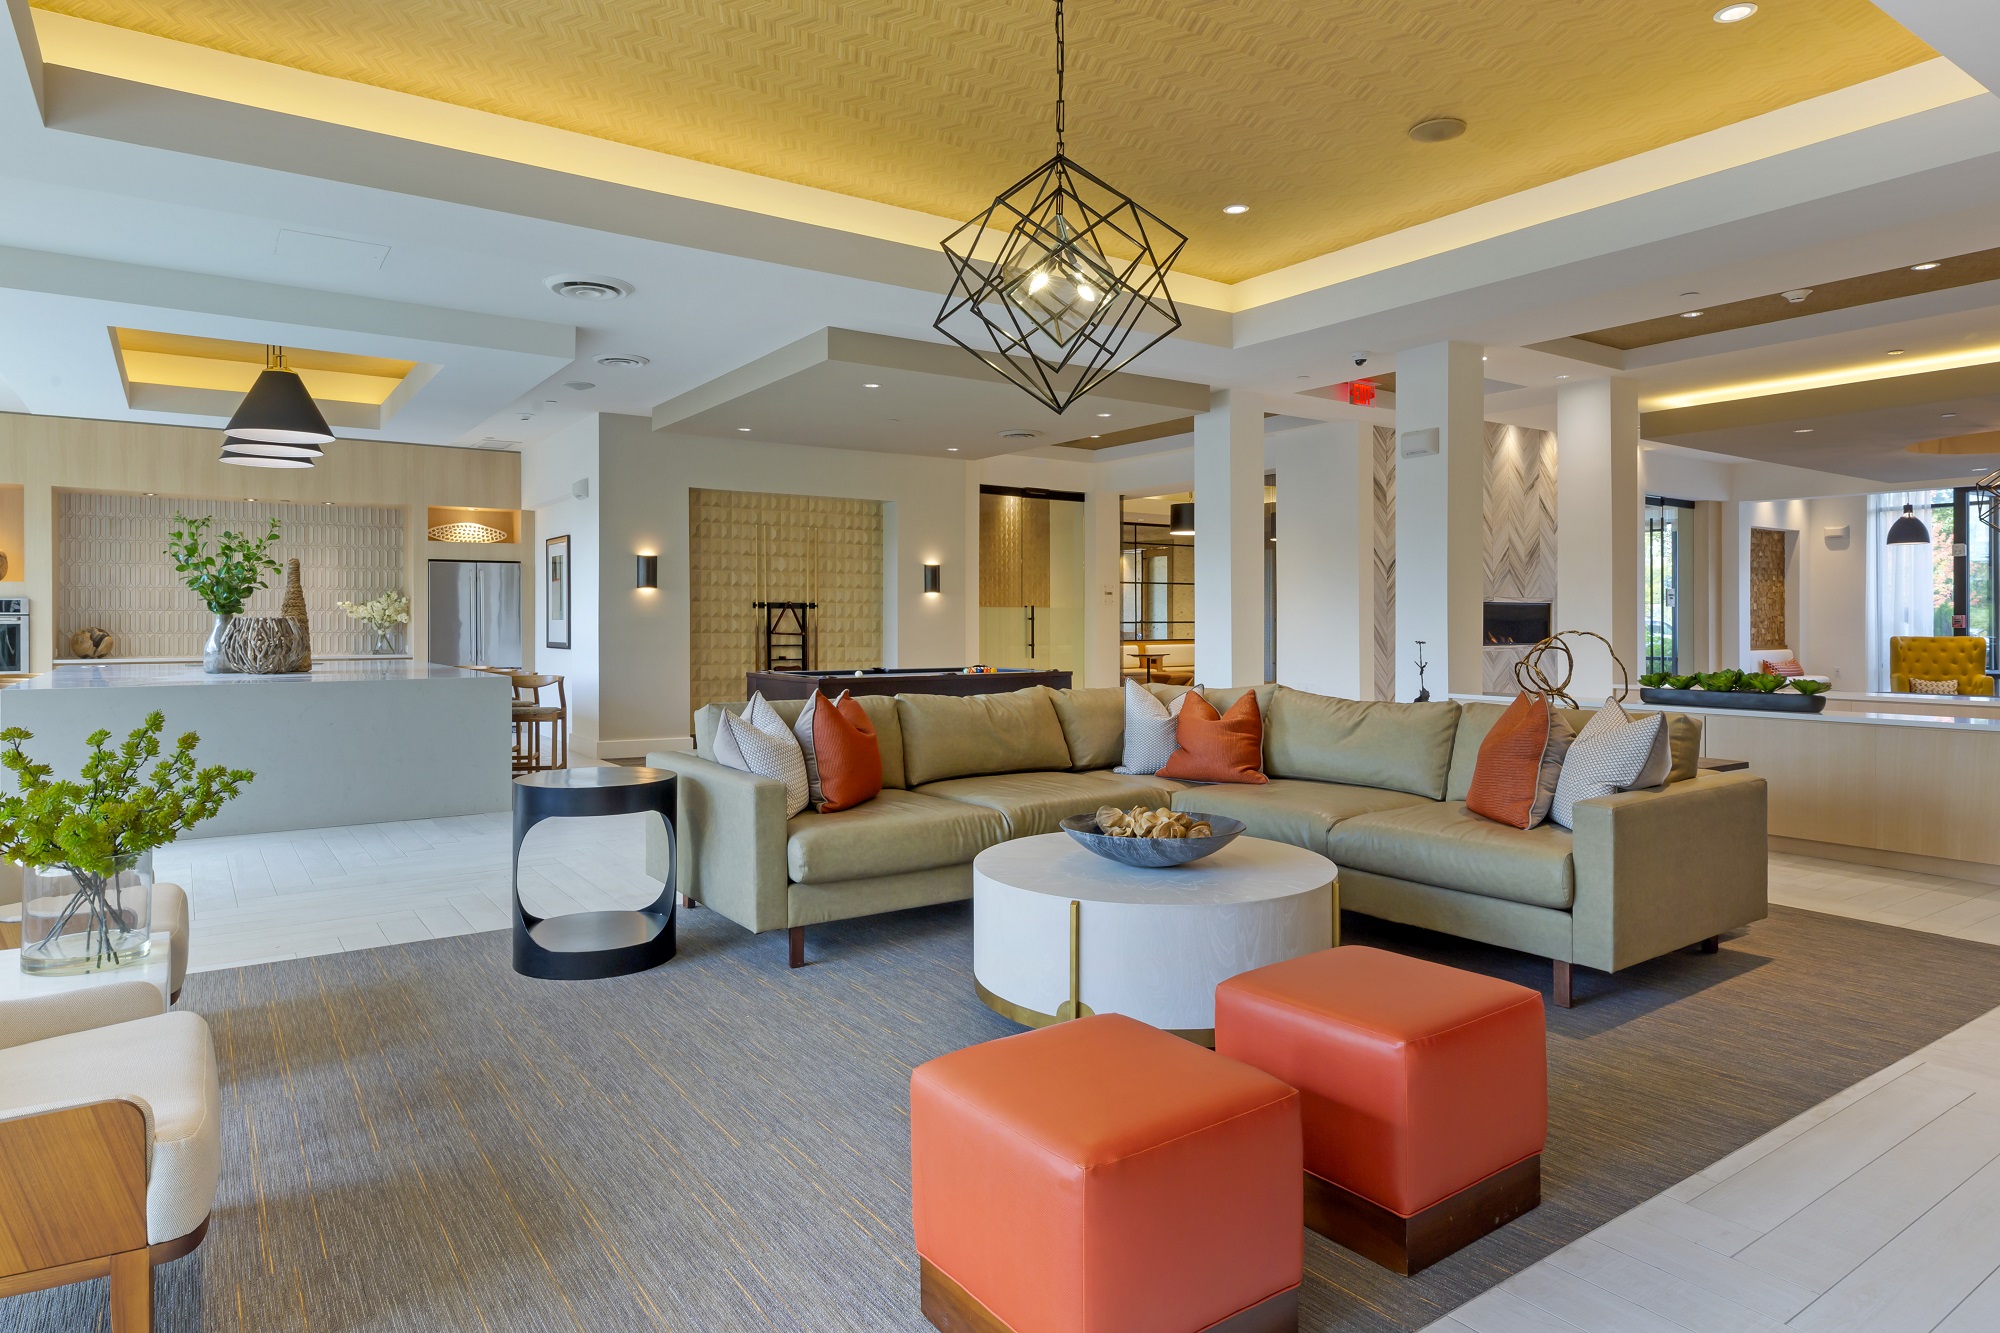 Clubhouse with variety of seating, pool table, designer lighting, large flat screen TV, and tile flooring